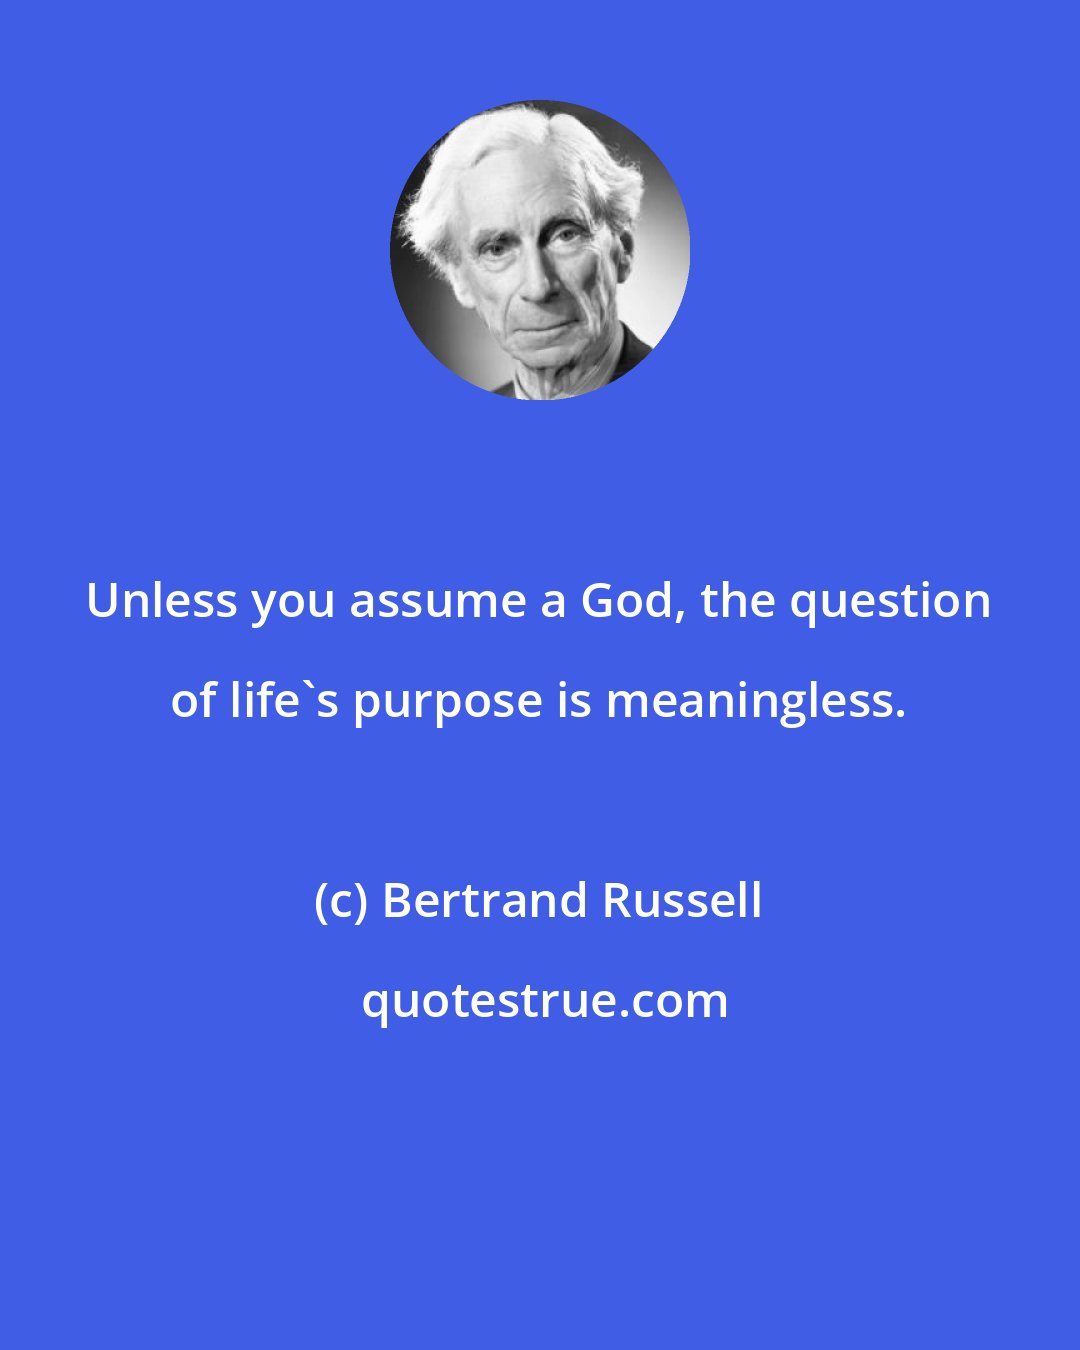 Bertrand Russell: Unless you assume a God, the question of life's purpose is meaningless.